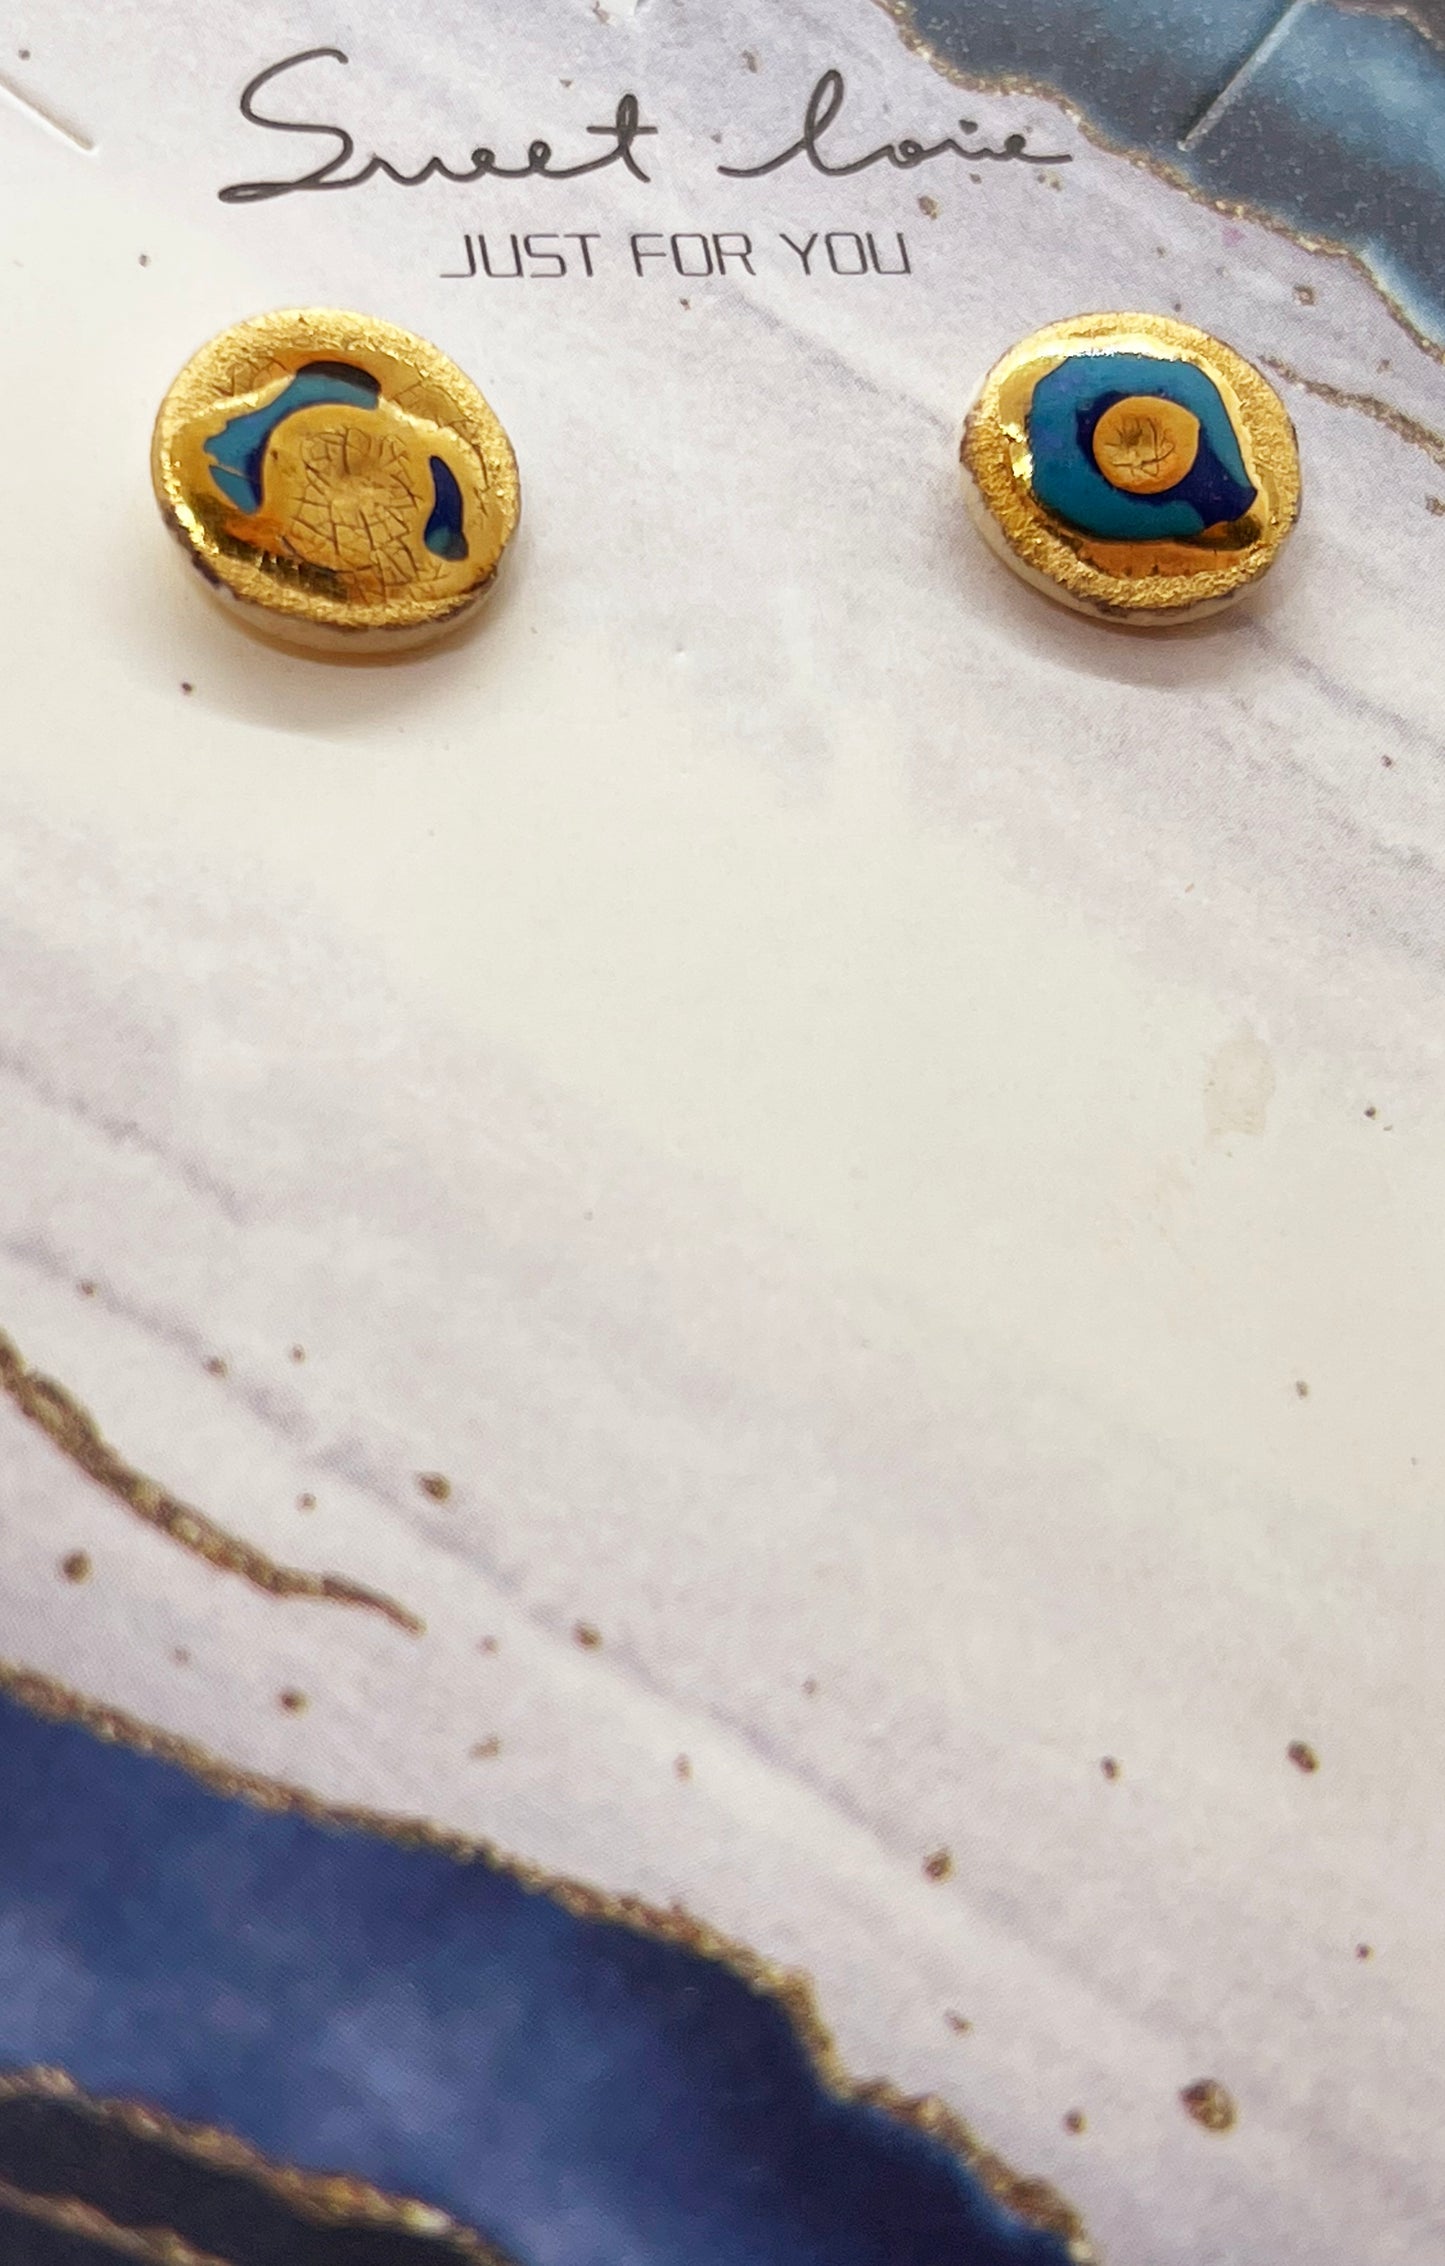 Earring set with 24k Yellow Gold Accents - ARTISTIC BLUES - MICRO CIRCLE STUD